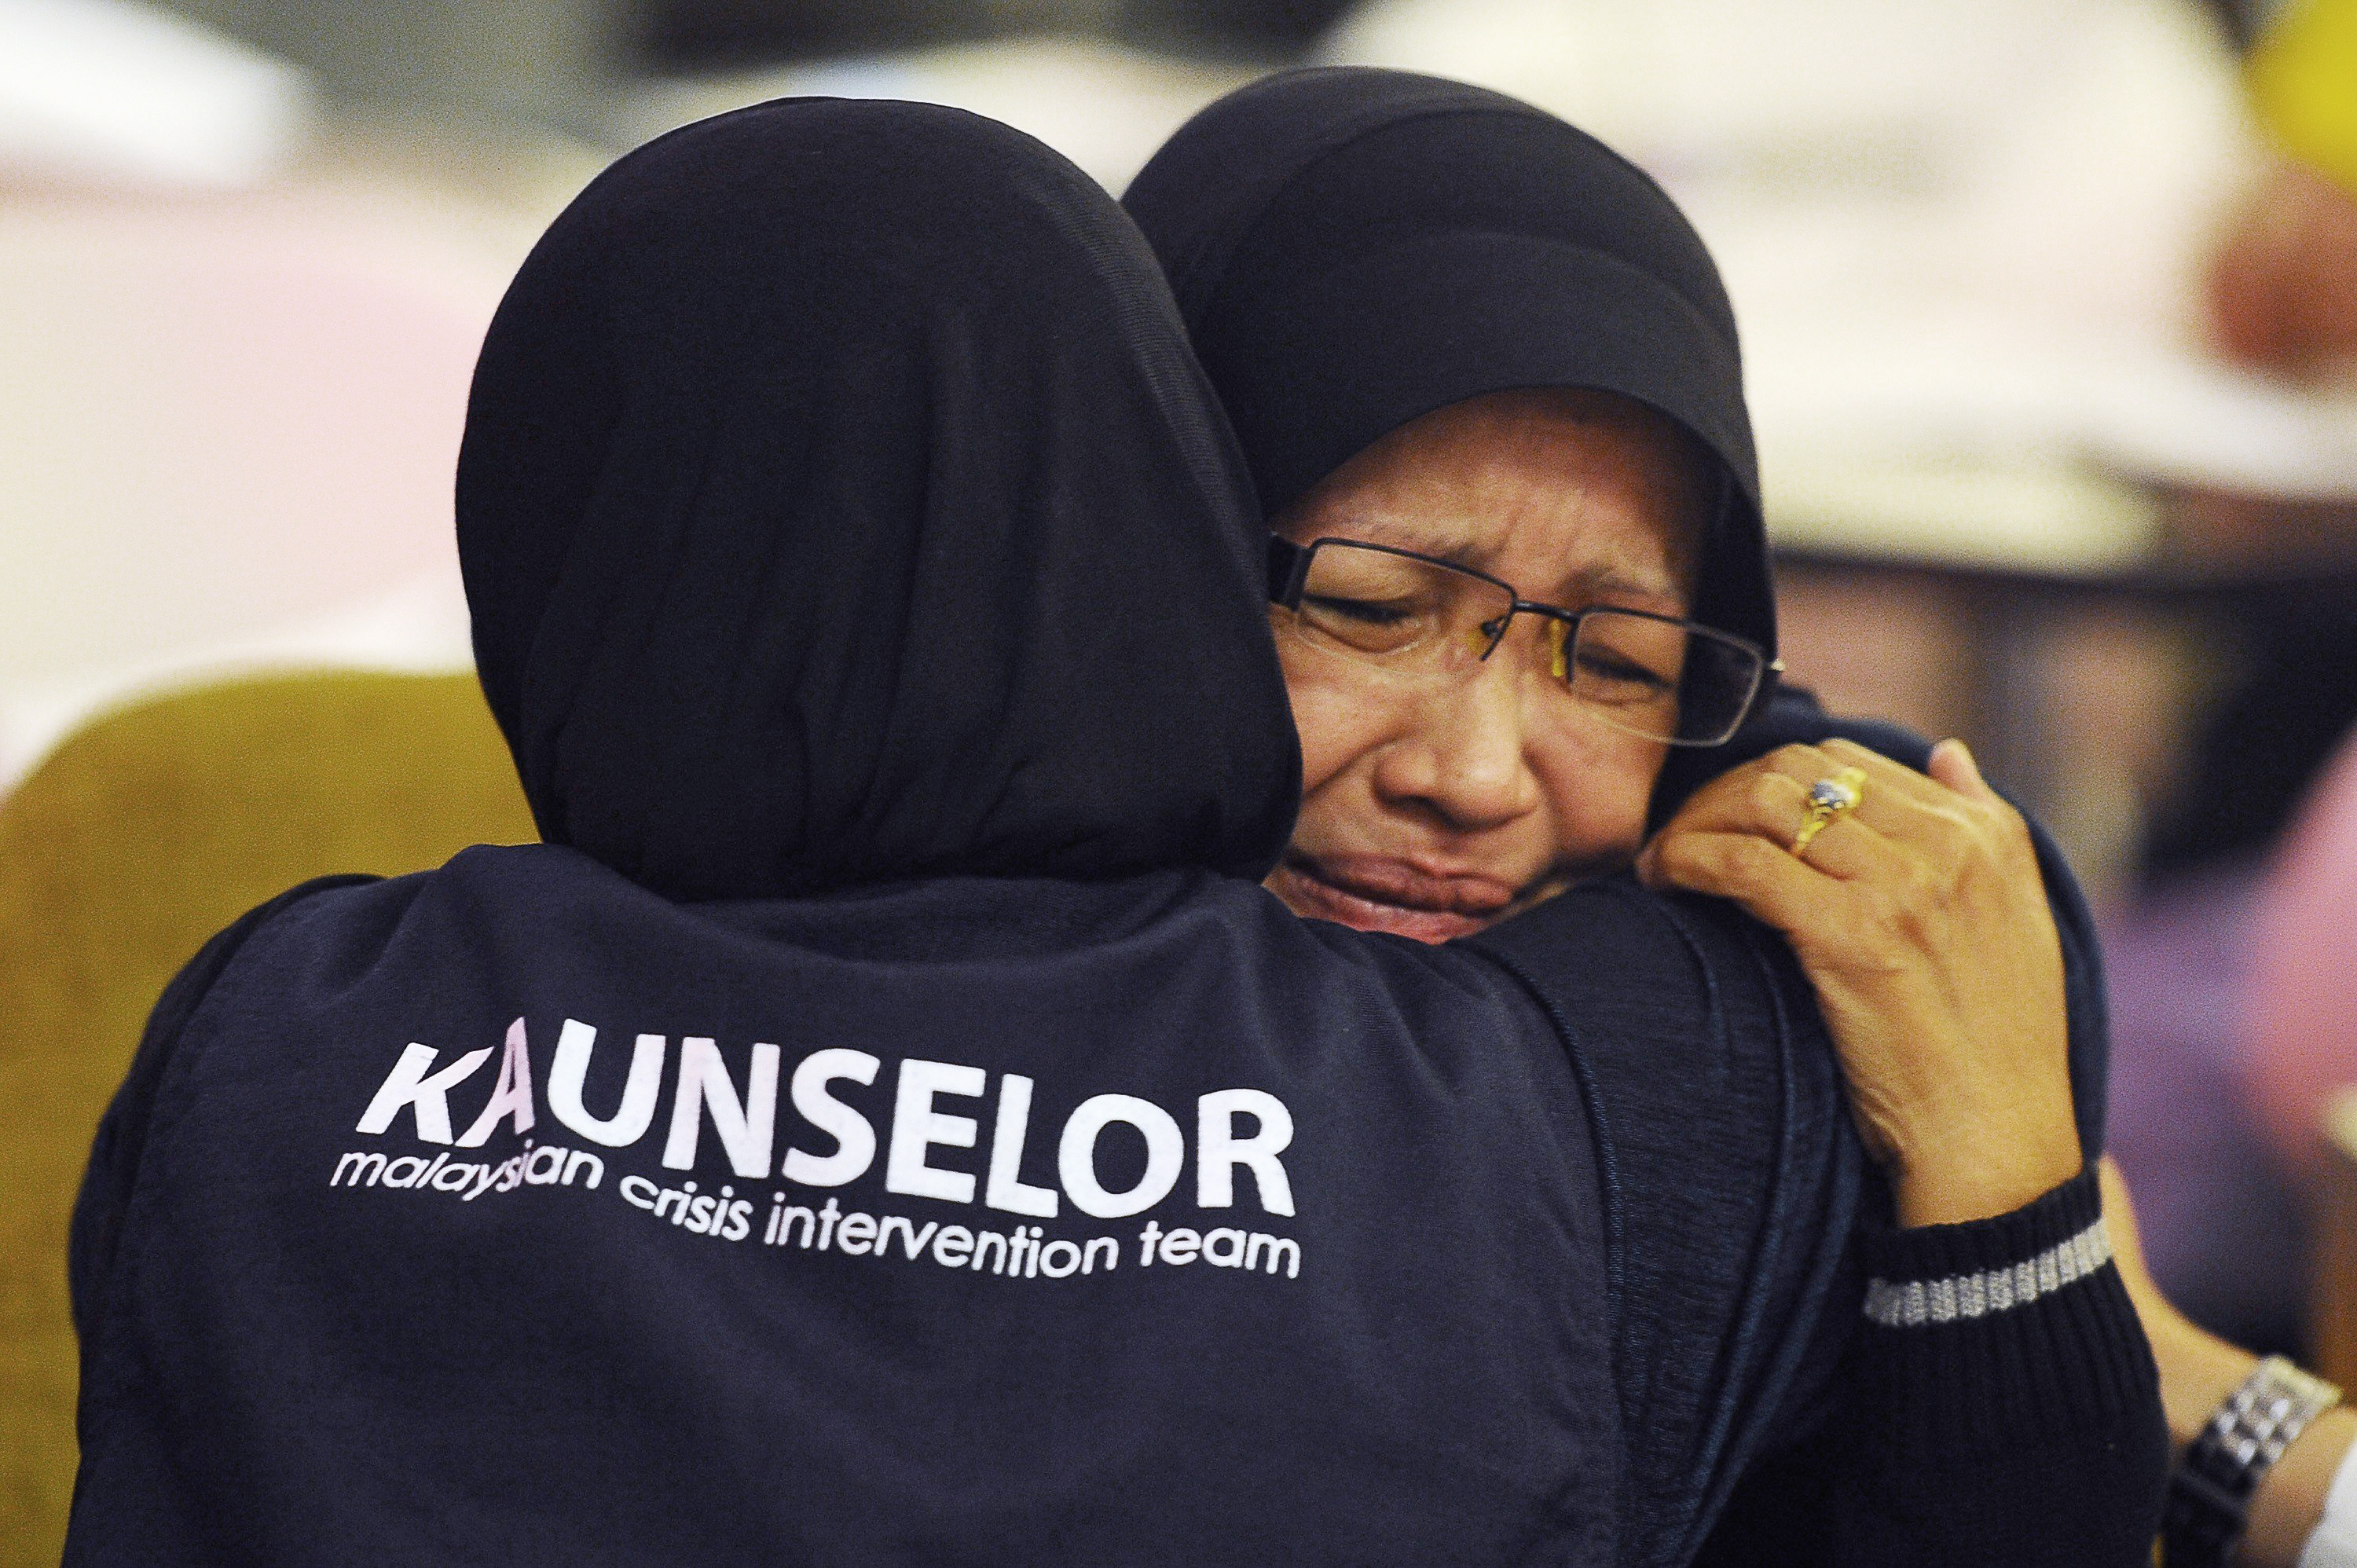 A family member of one of the passengers aboard a missing plane is consoled by a crisis counselor at a hotel in Putrjaya, outside Kuala Lumpur, on March 9, 2014. (Joshua Paul—NurPhoto/Corbis)